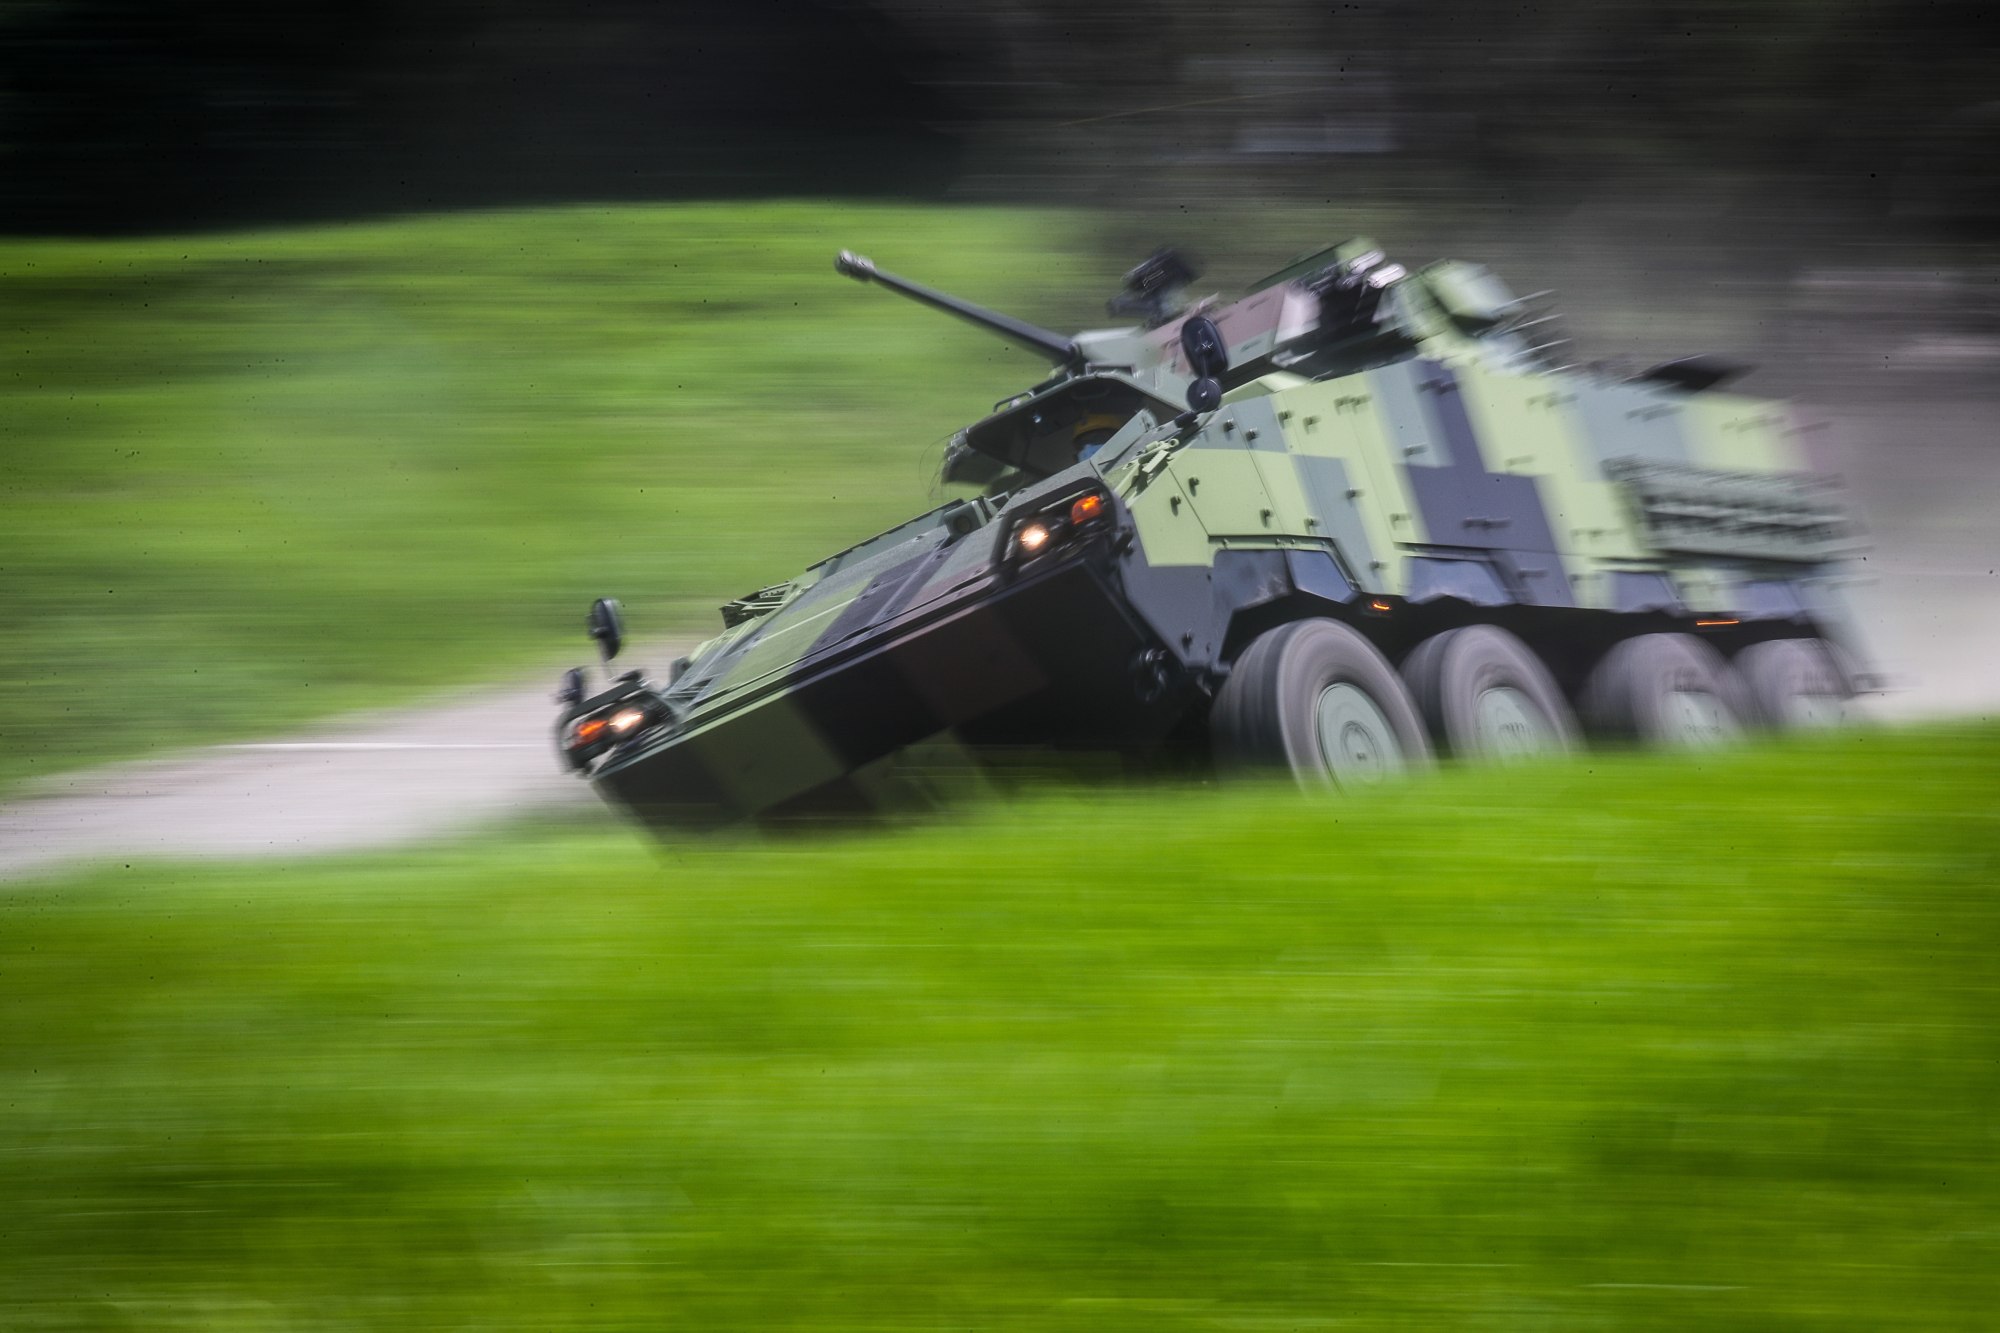 One of Taiwan’s CM-34 armored vehicles maneuvers during a demonstration inside a military testing facility in Nantou county, central Taiwan, on Thursday. Photo: EPA-EFE